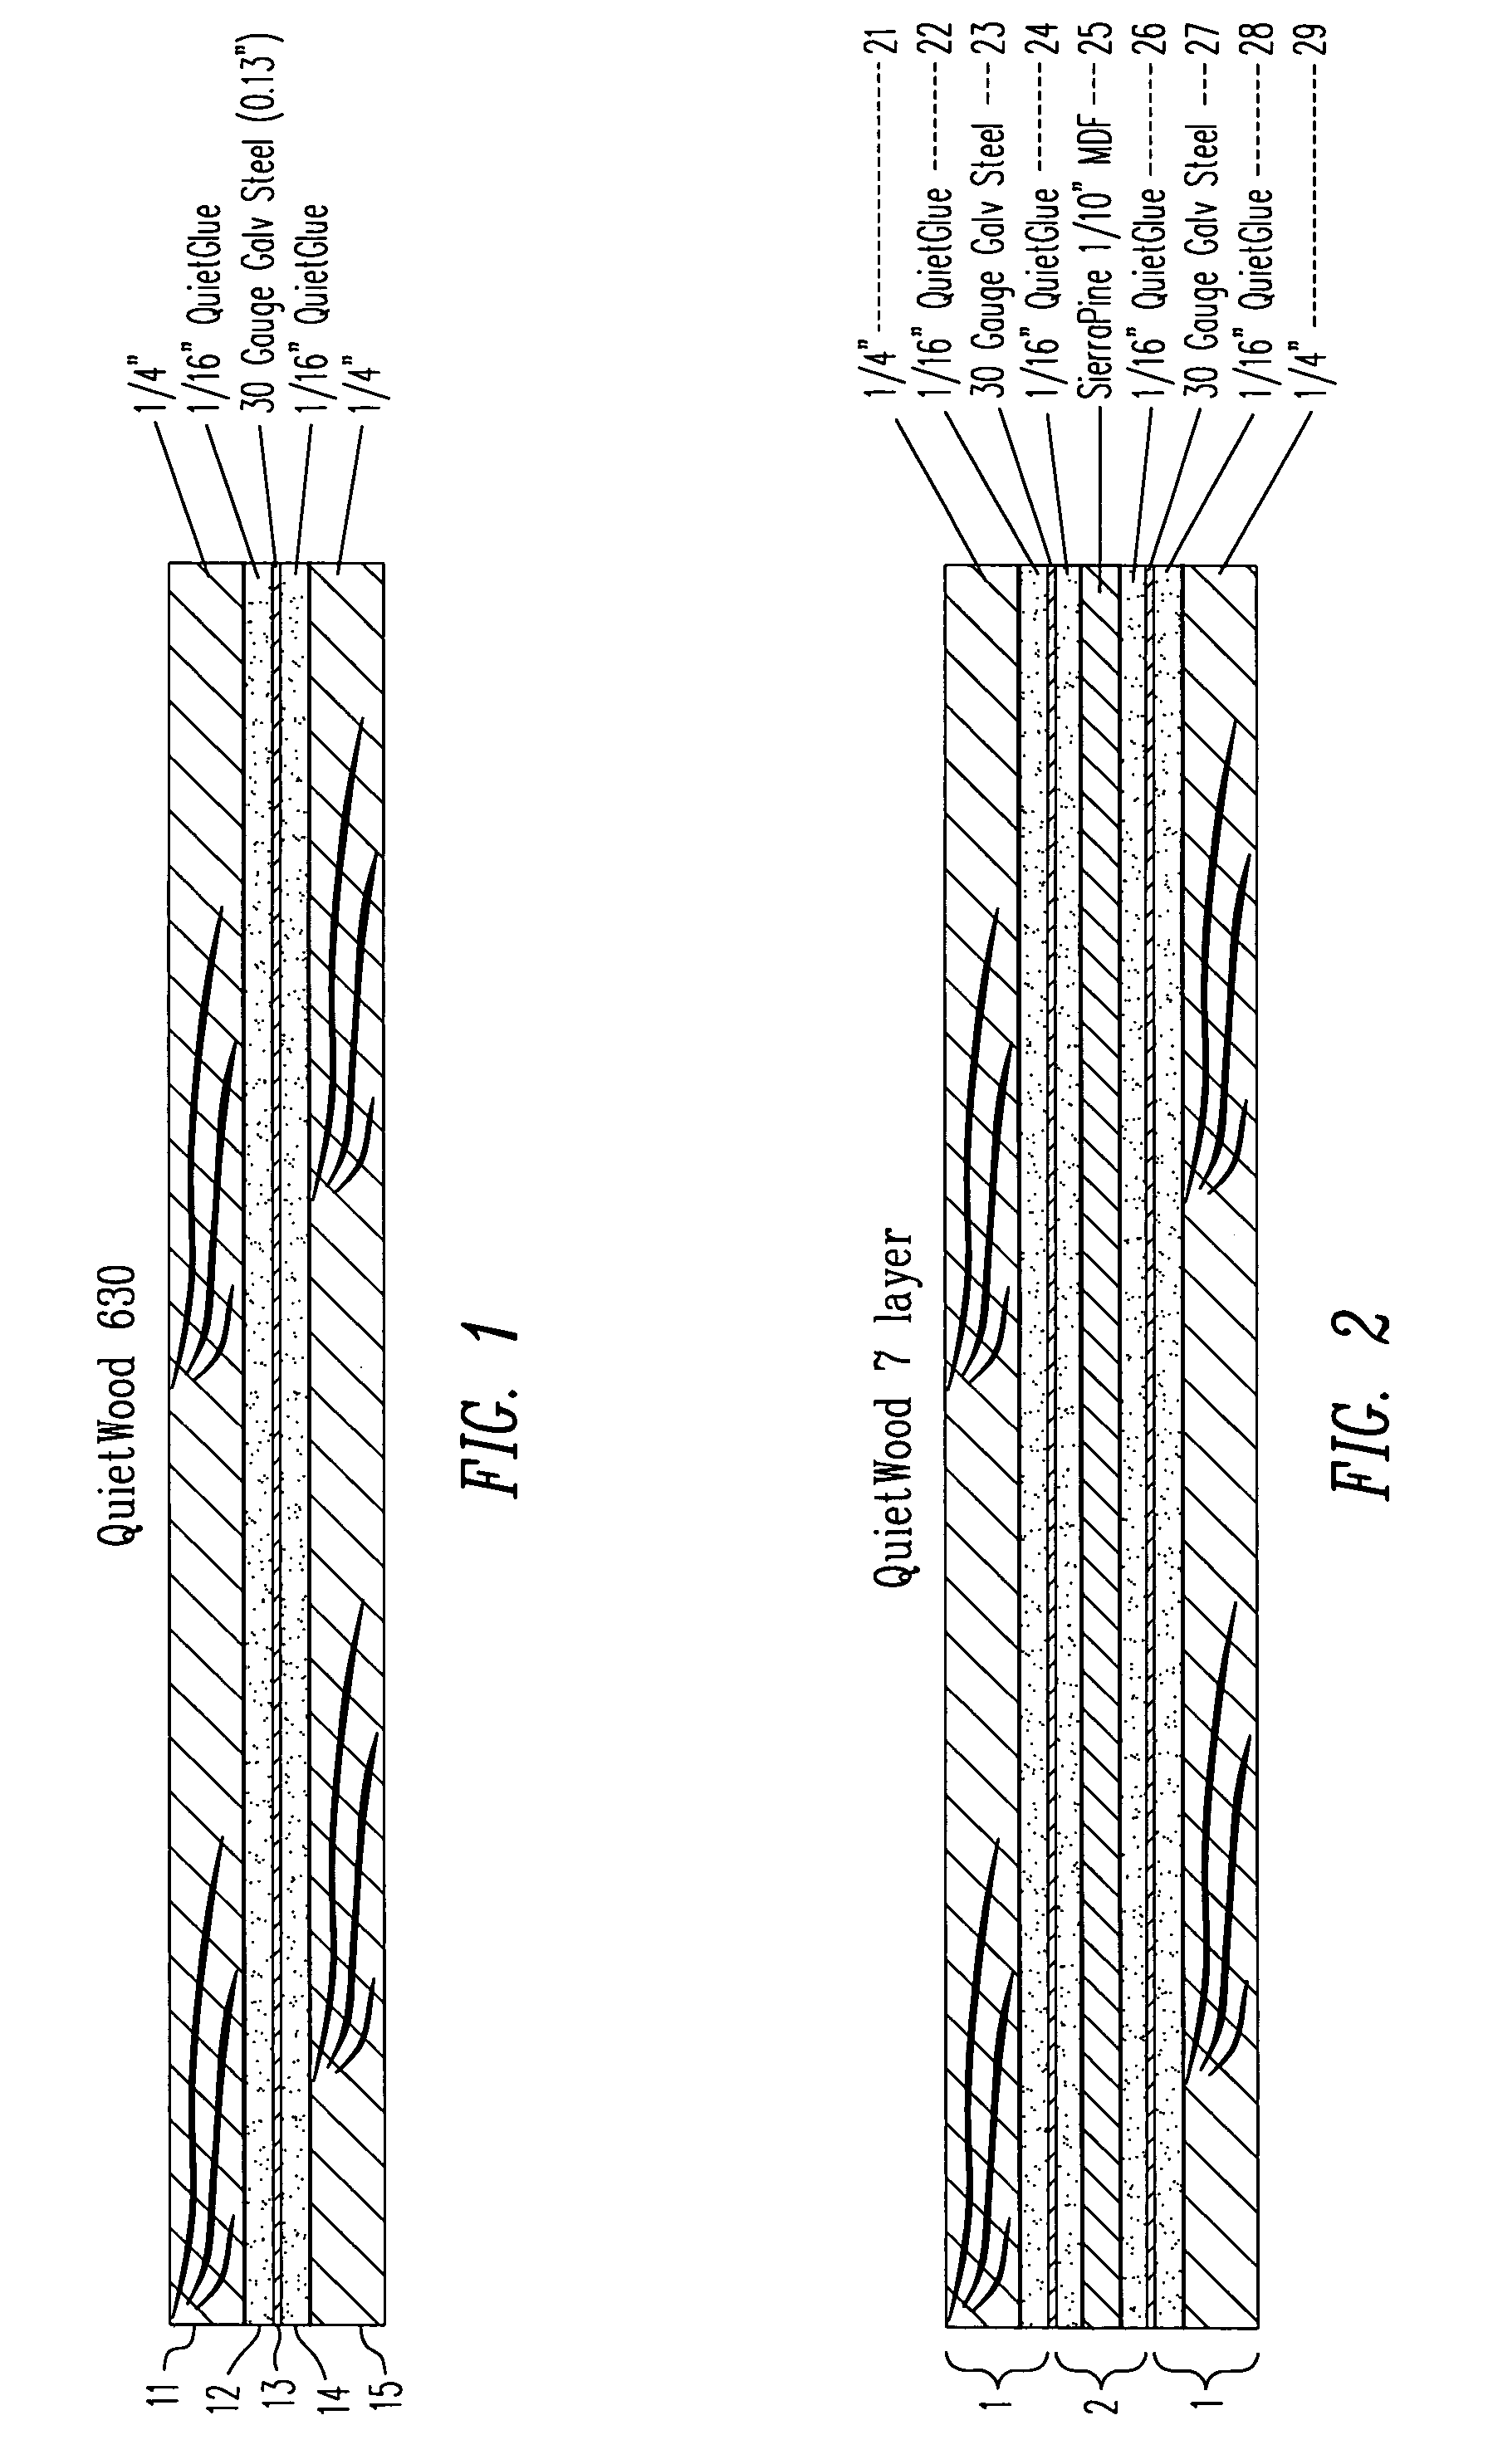 Acoustical sound proofing material and methods for manufacturing same